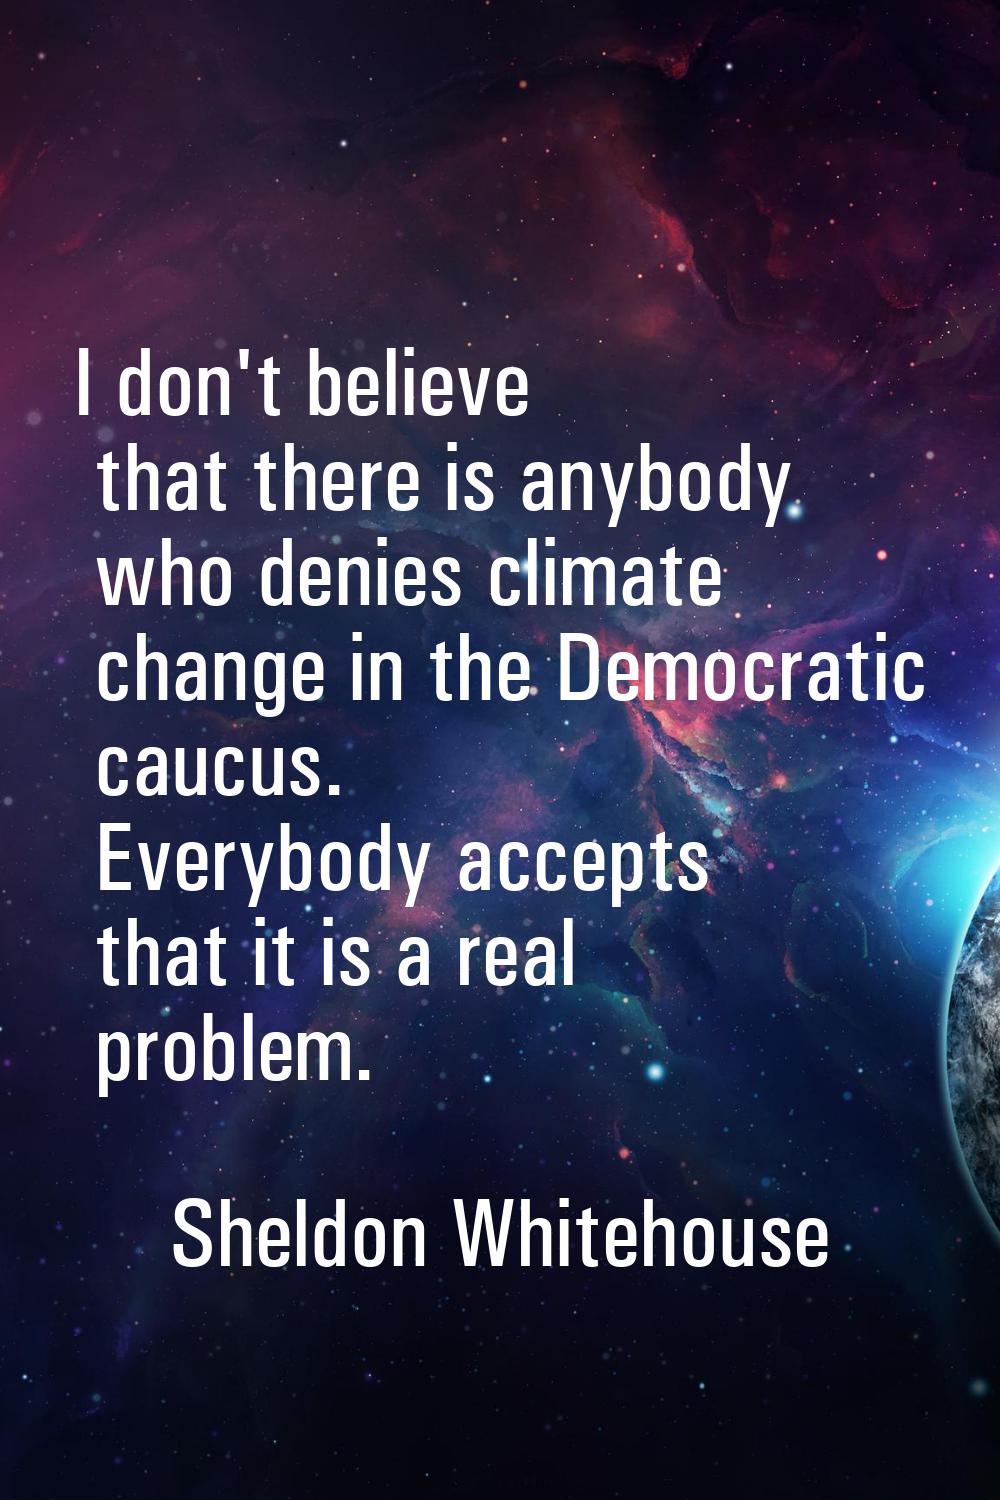 I don't believe that there is anybody who denies climate change in the Democratic caucus. Everybody